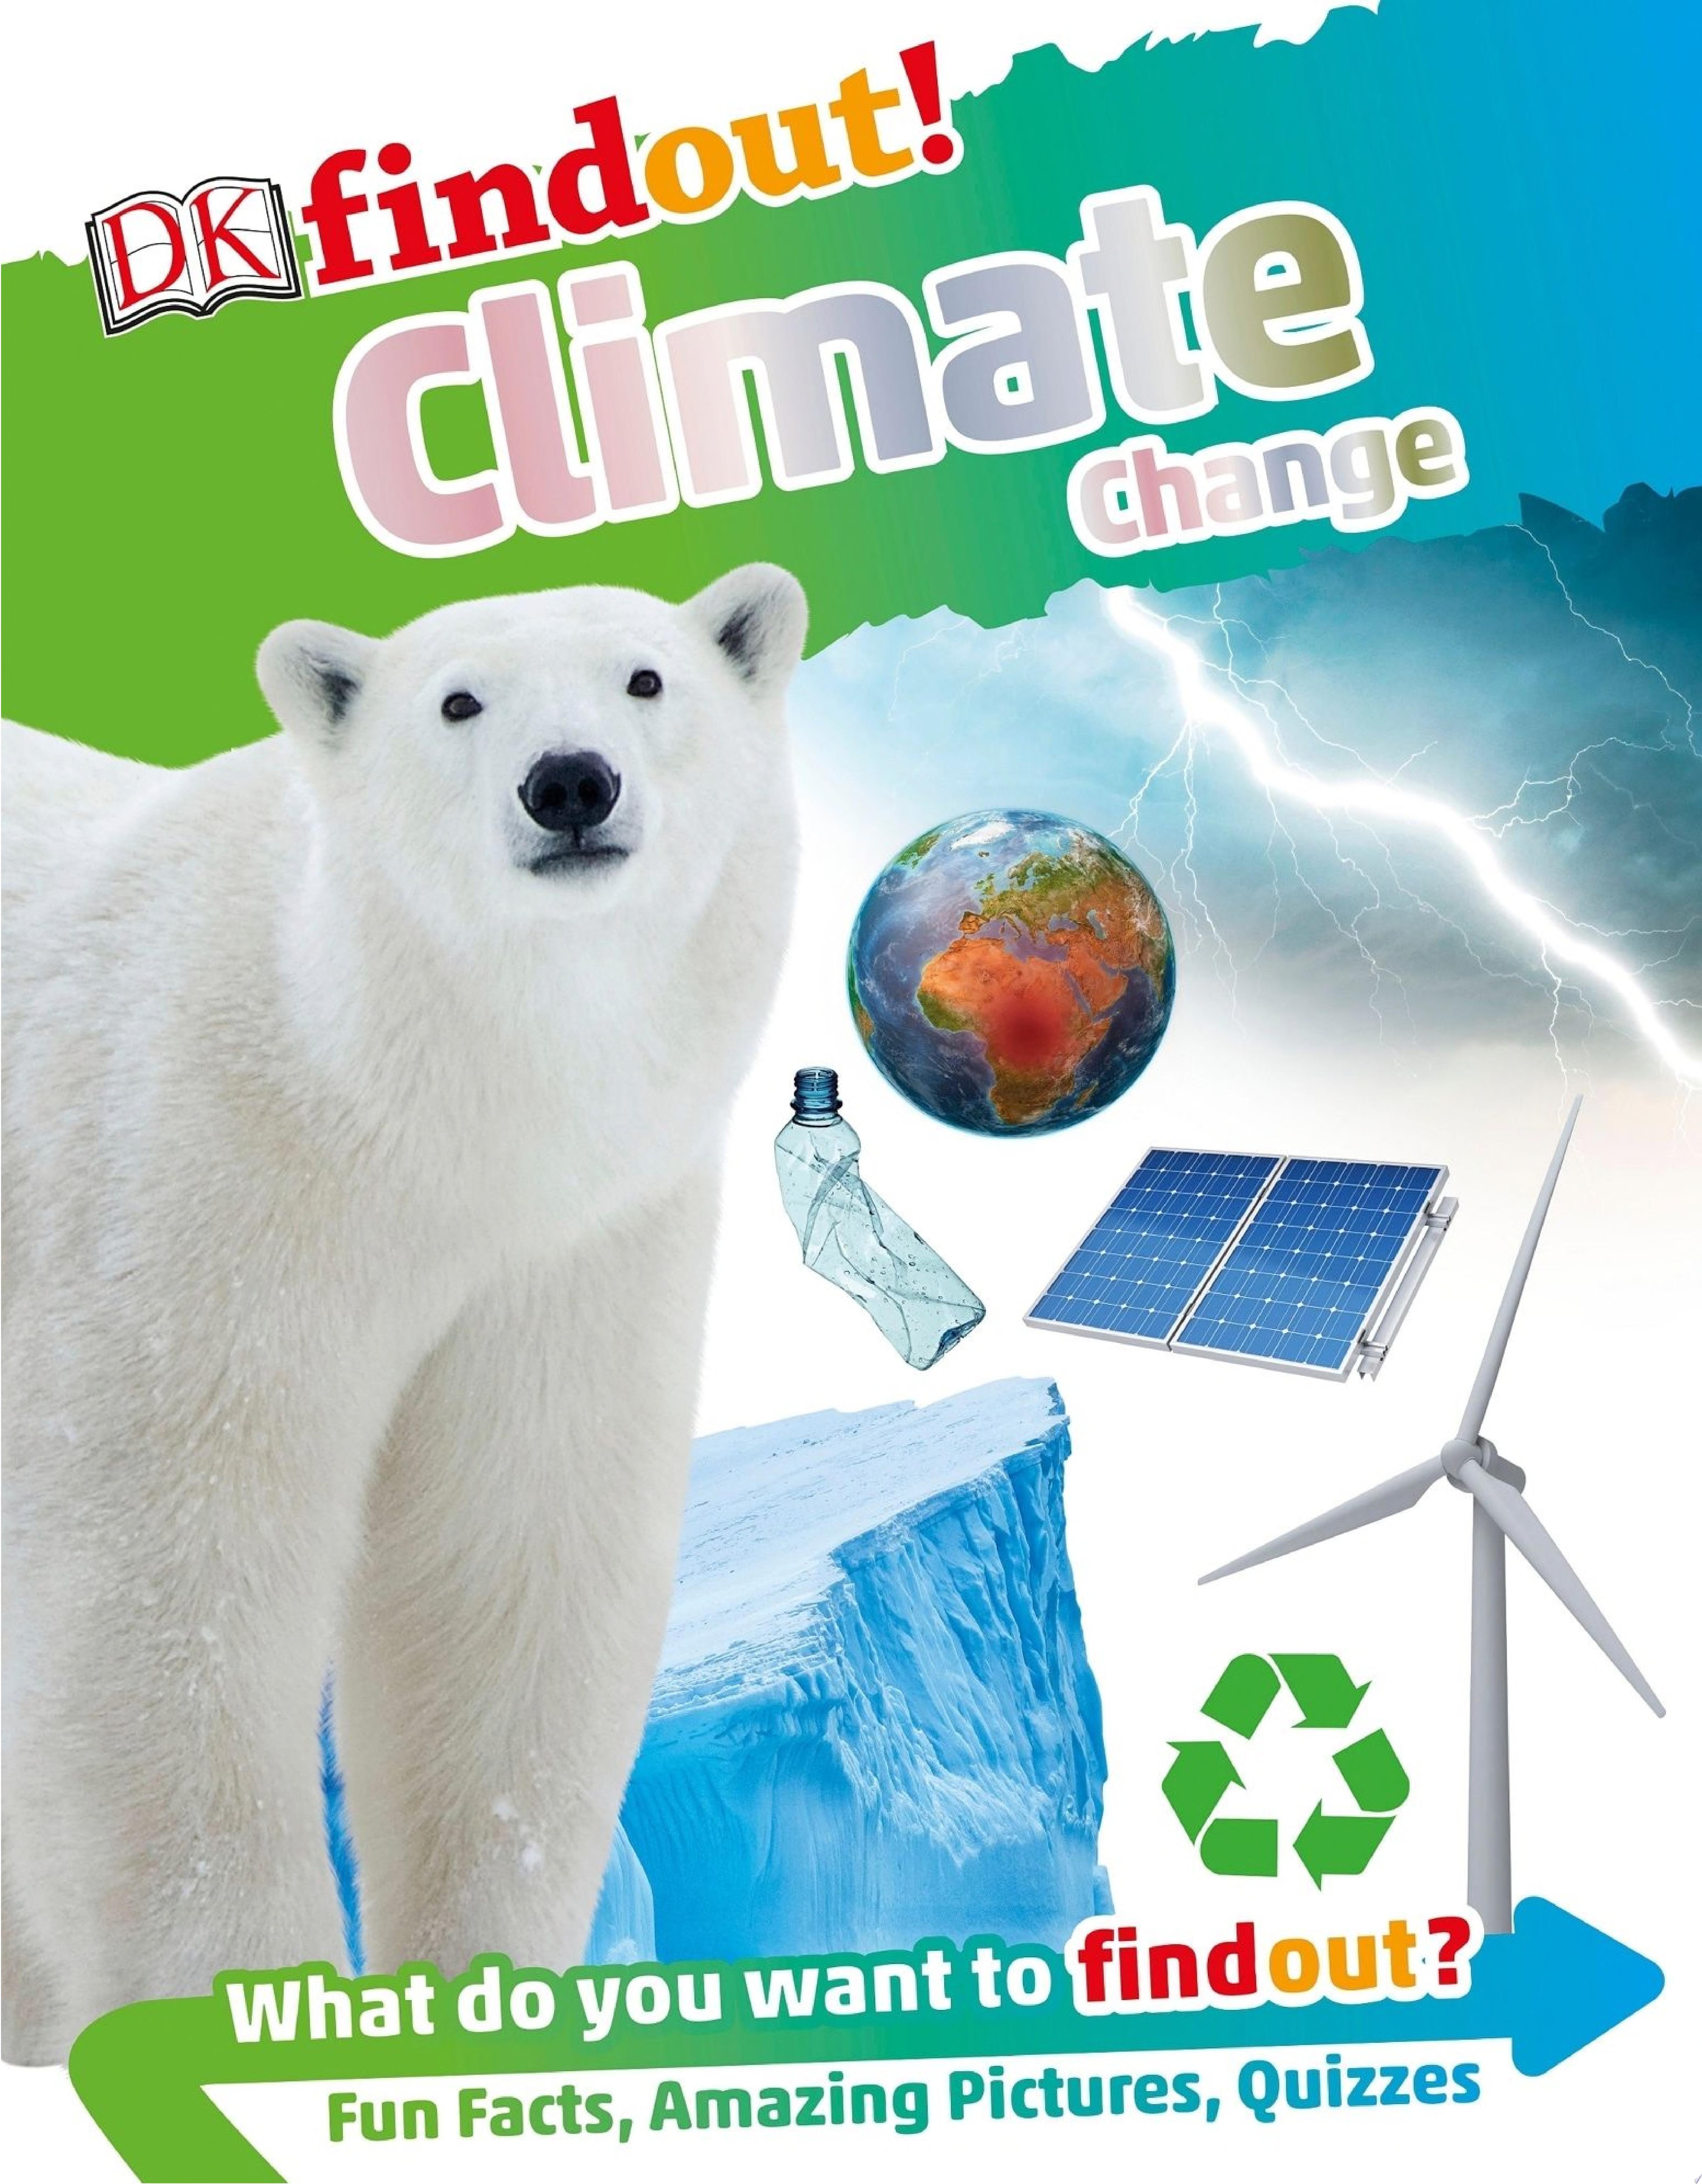 Image for "DKfindout! Climate Change"